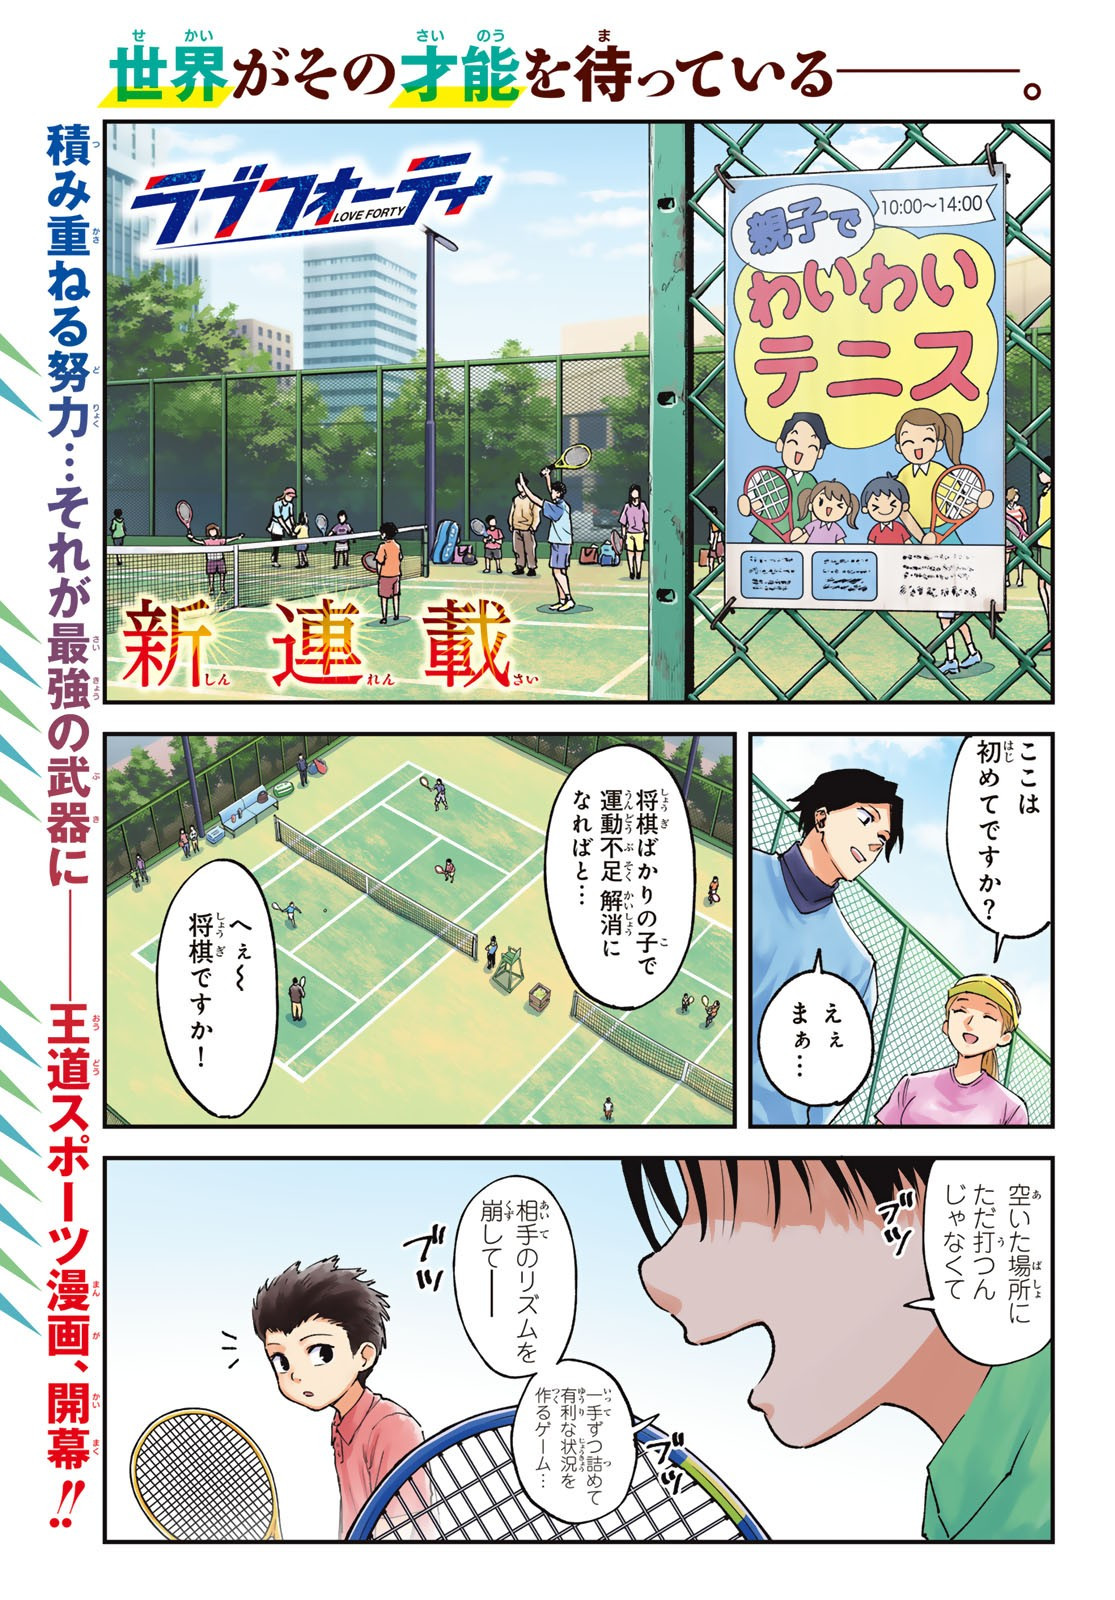 Weekly Shōnen Magazine - 週刊少年マガジン - Chapter 2024-28 - Page 11